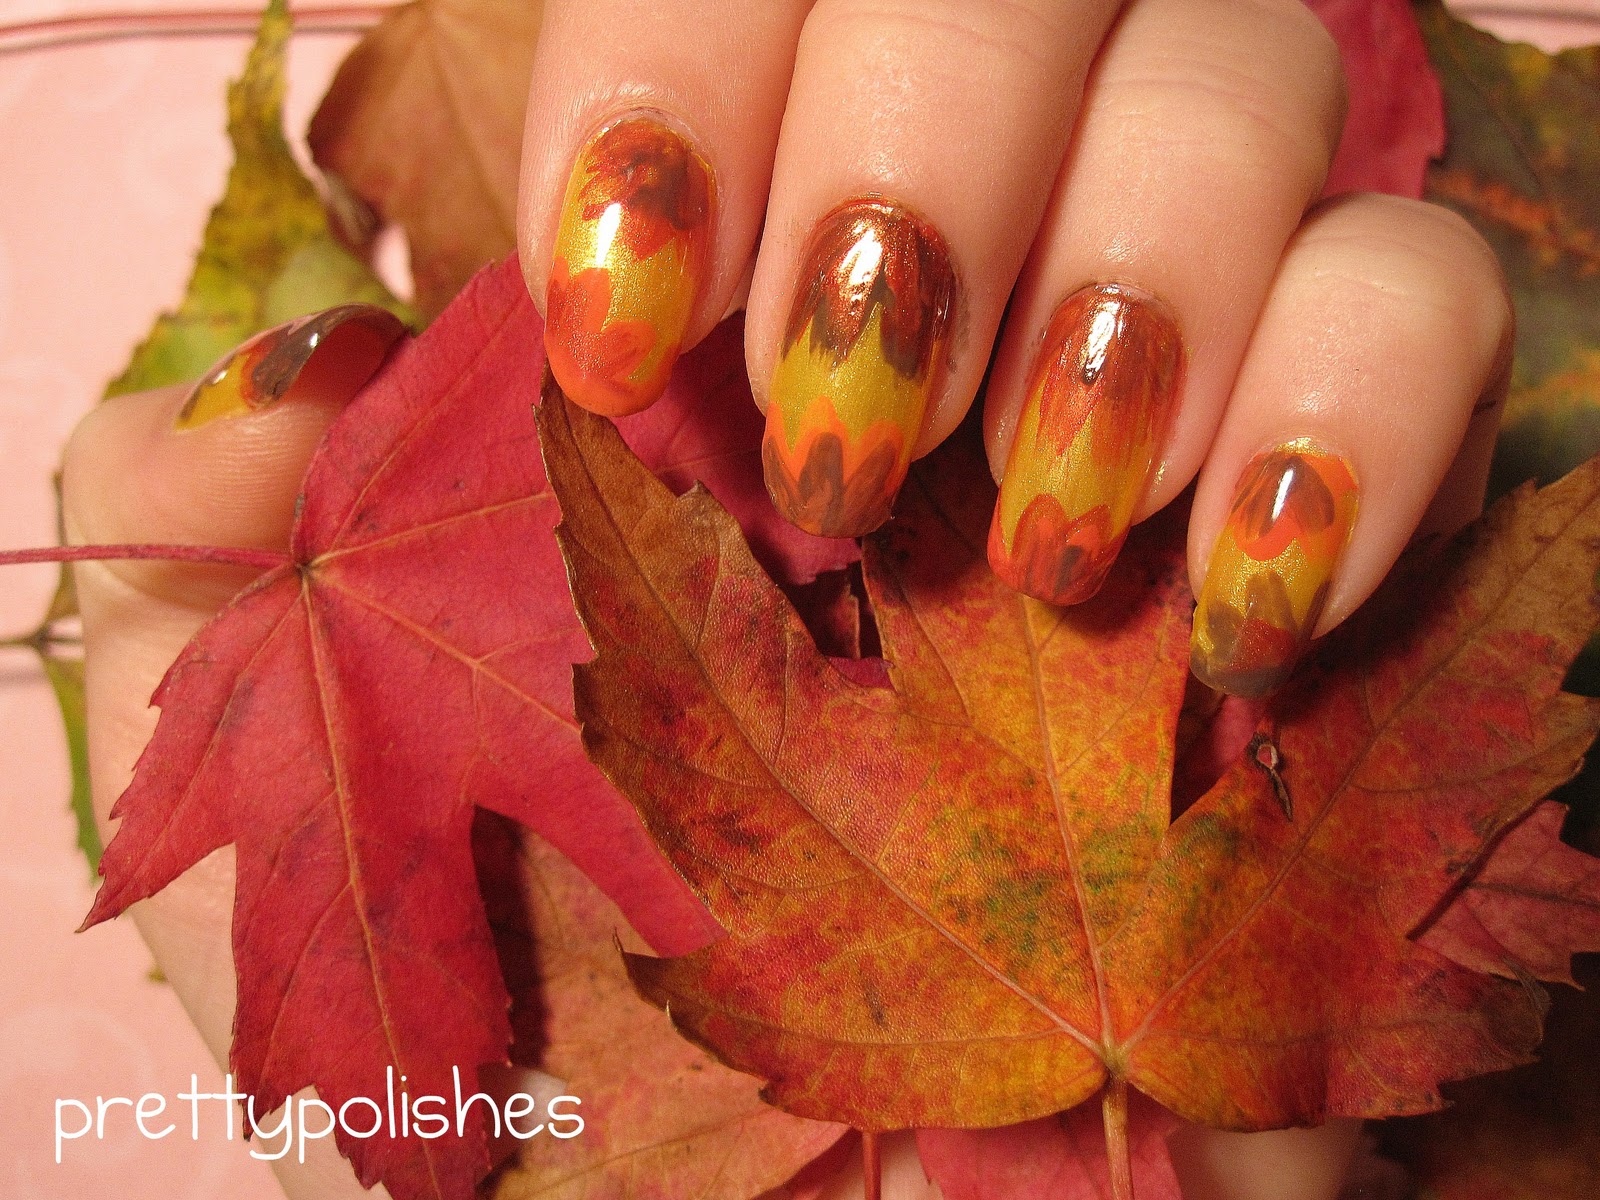 10. Travel-inspired nail art for your fall adventures - wide 5